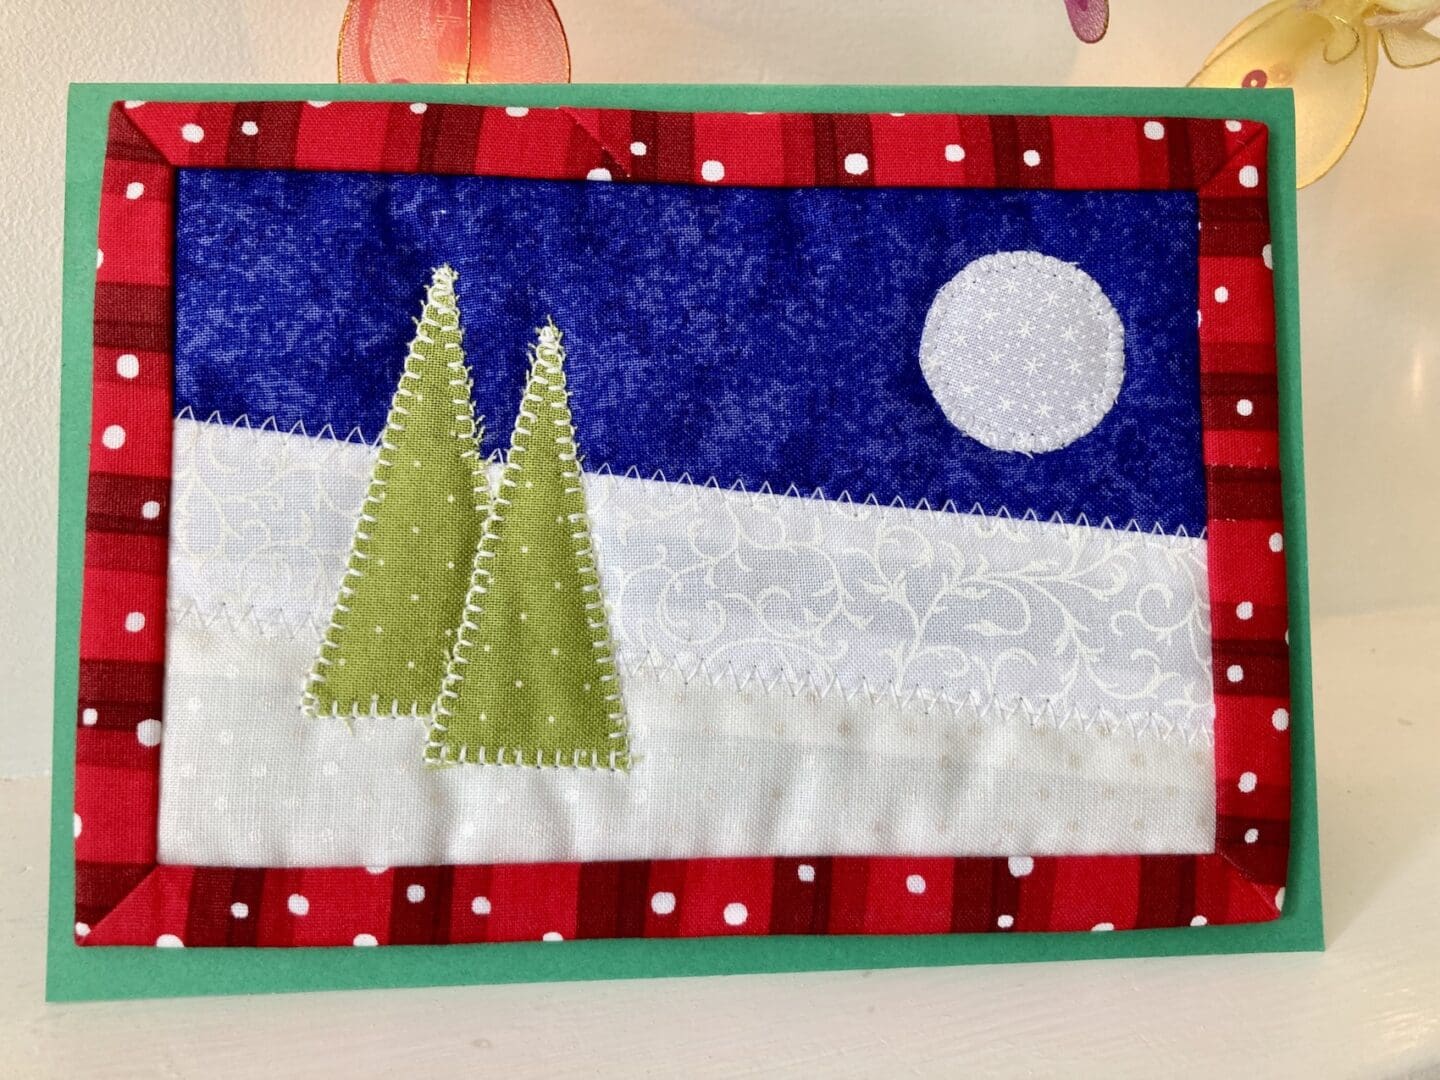 Christmas card in fabric with two green trees and a blue moon against a winter background